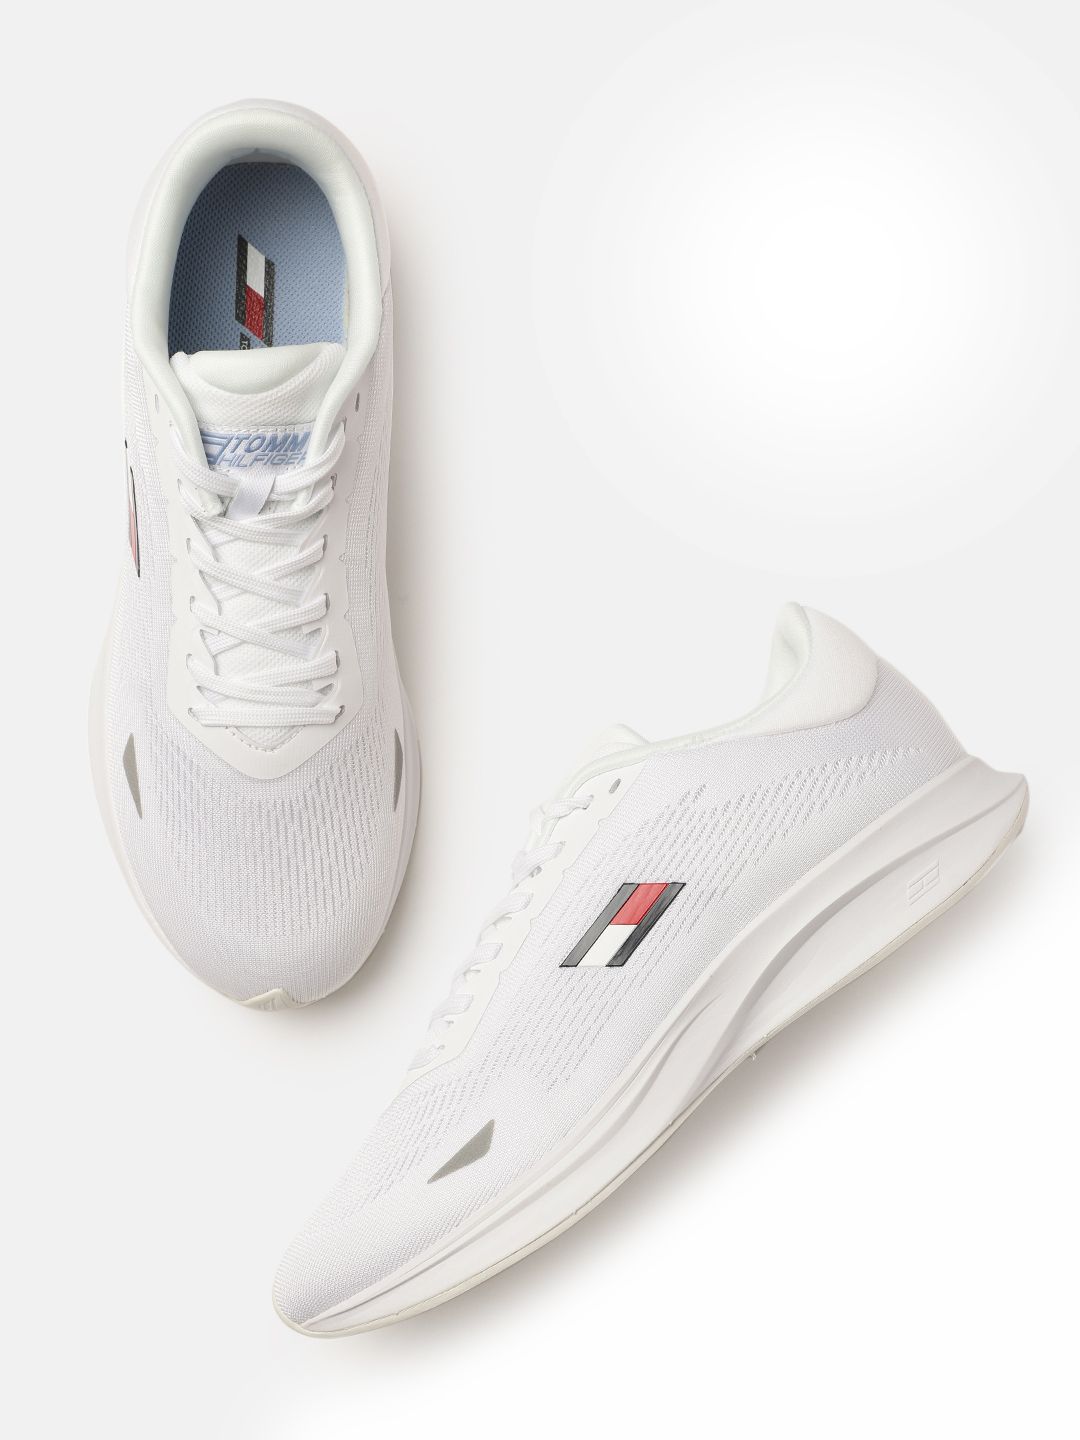 Tommy Hilfiger Women White Textured Sleek 3 Regular Sneakers with Tech Foam Pro Midsole Price in India